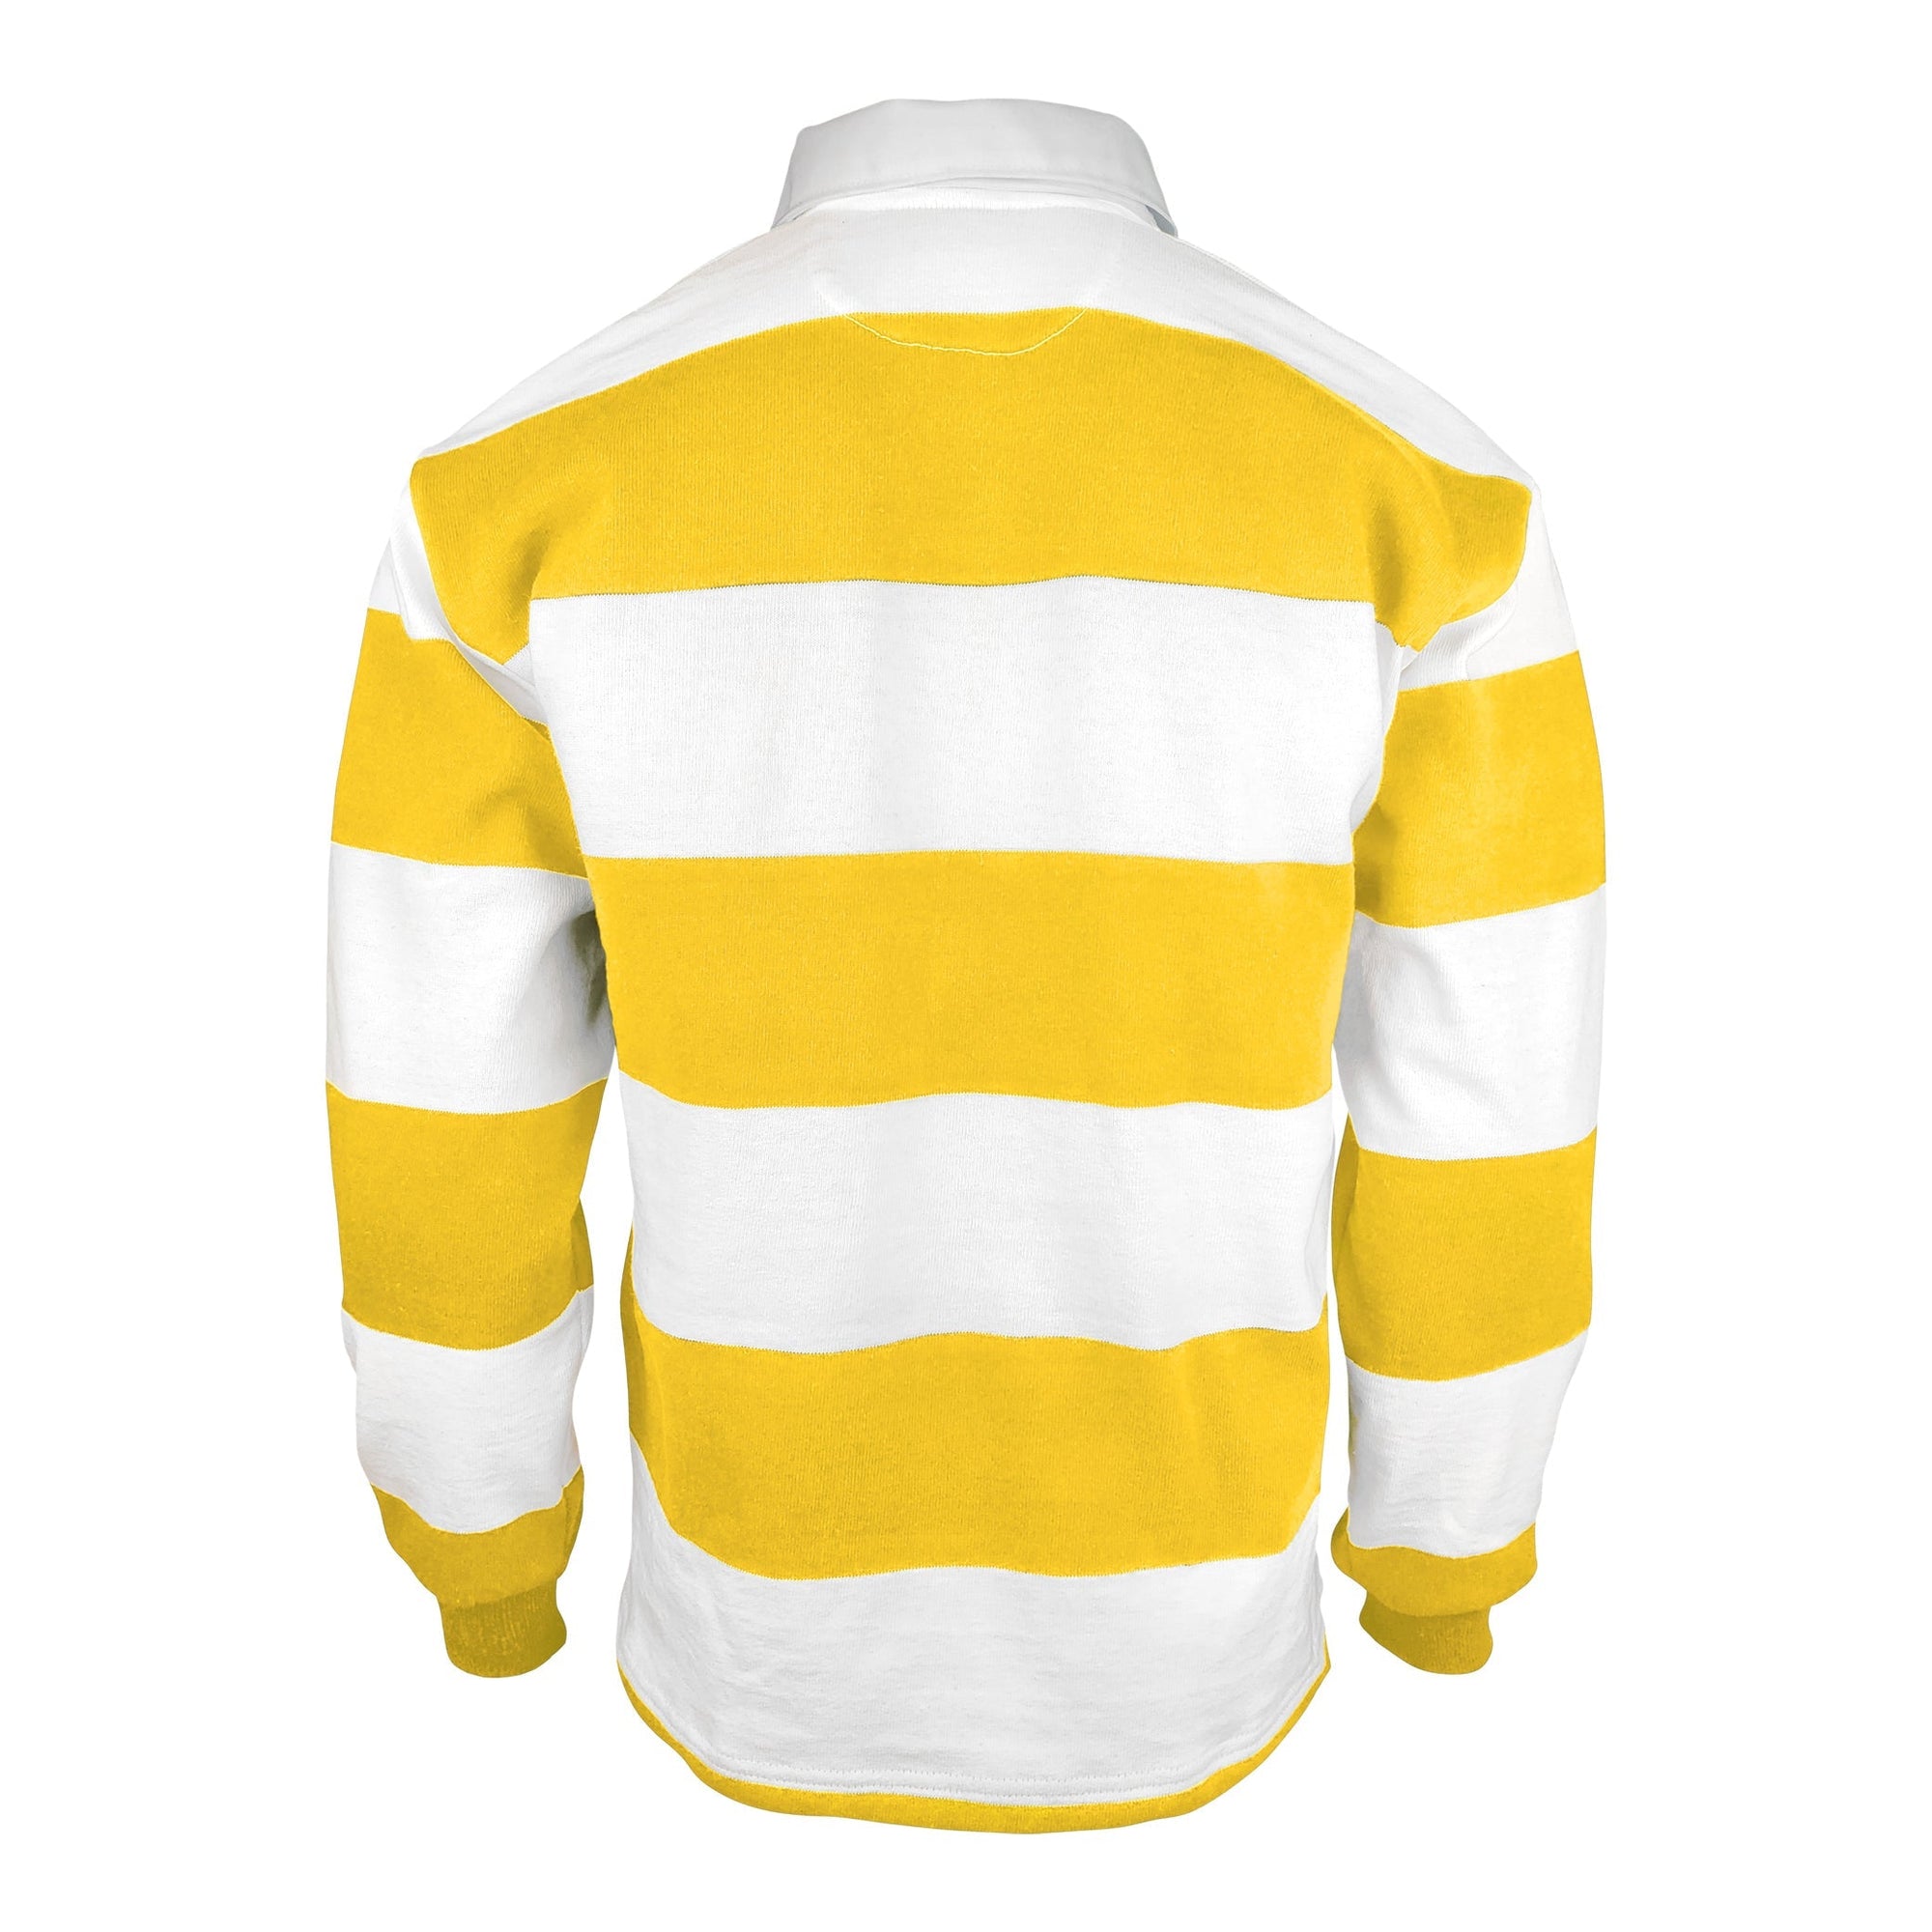 Rugby Imports Montclair Casual Weight Stripe Jersey